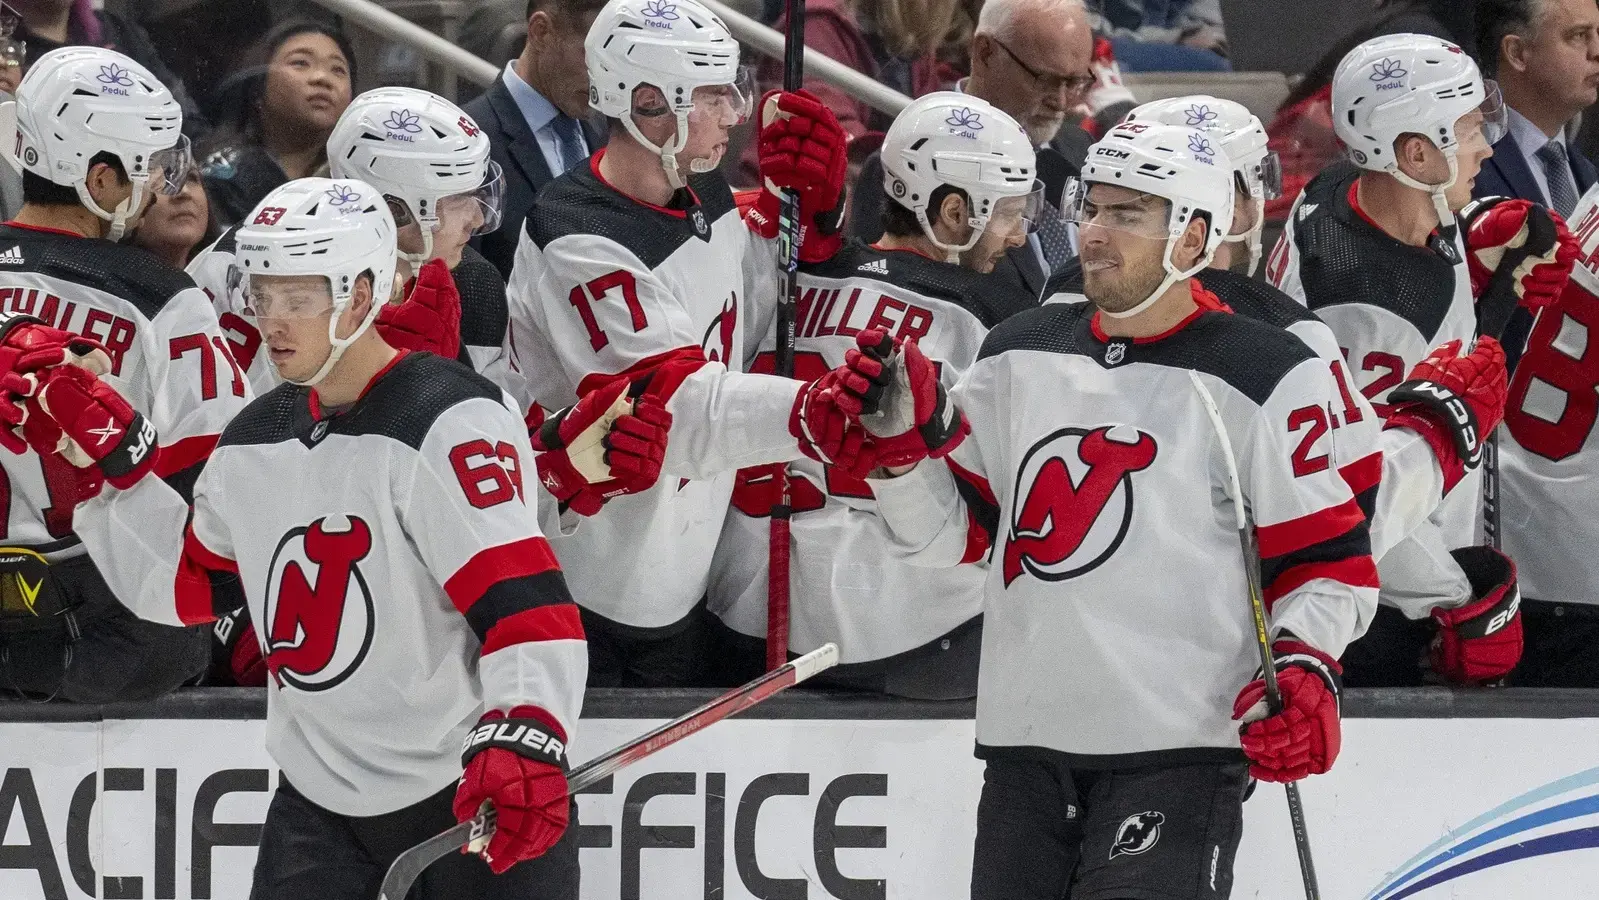 New Jersey Devils left wing Jesper Bratt (63) celebrates with teammates after the goal against the San Jose Sharks during the second period at SAP Center at San Jose. / Neville E. Guard-USA TODAY Sports